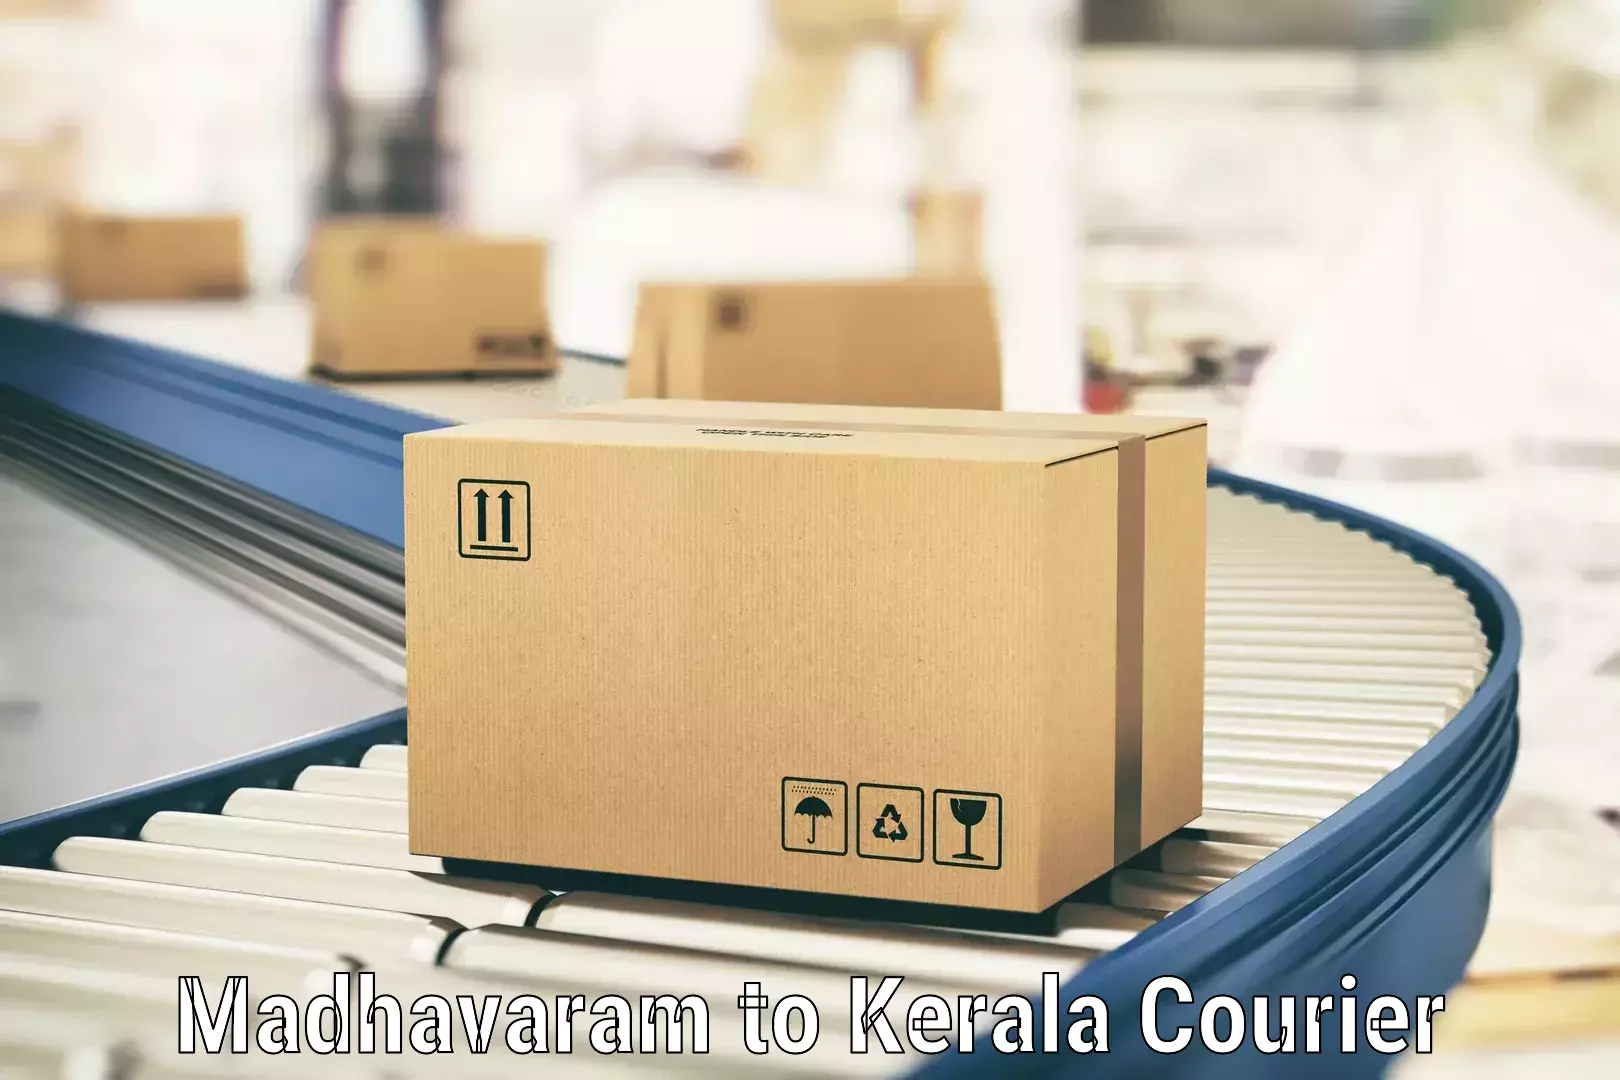 State-of-the-art courier technology Madhavaram to Parippally